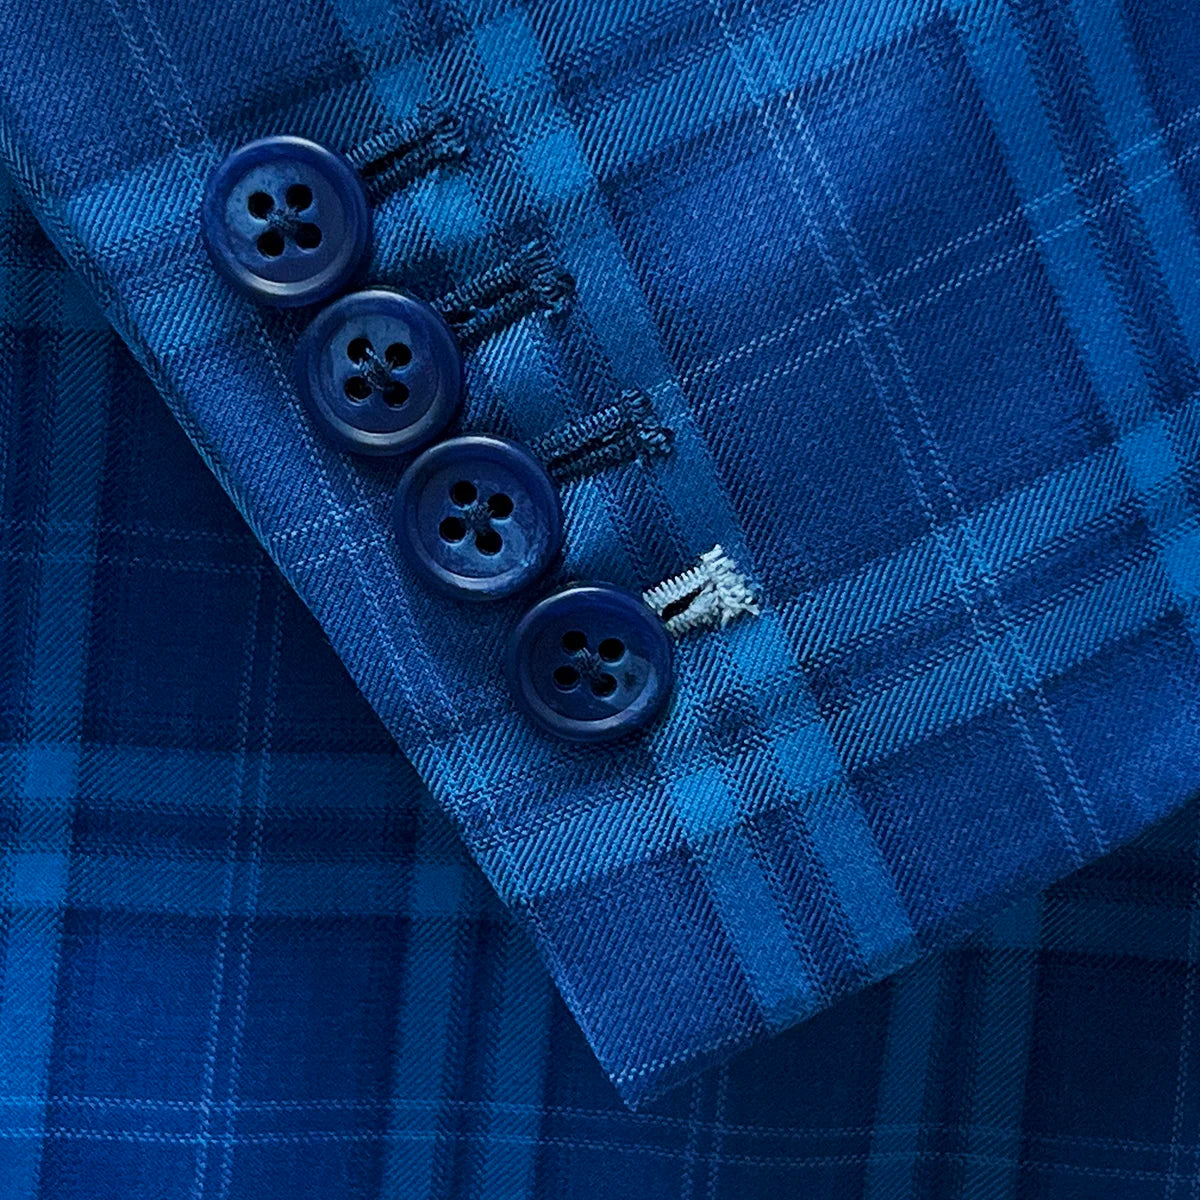 Functional sleeve buttonholes adding a practical feature to a colbalt blue checkered plaid men's sport coat.